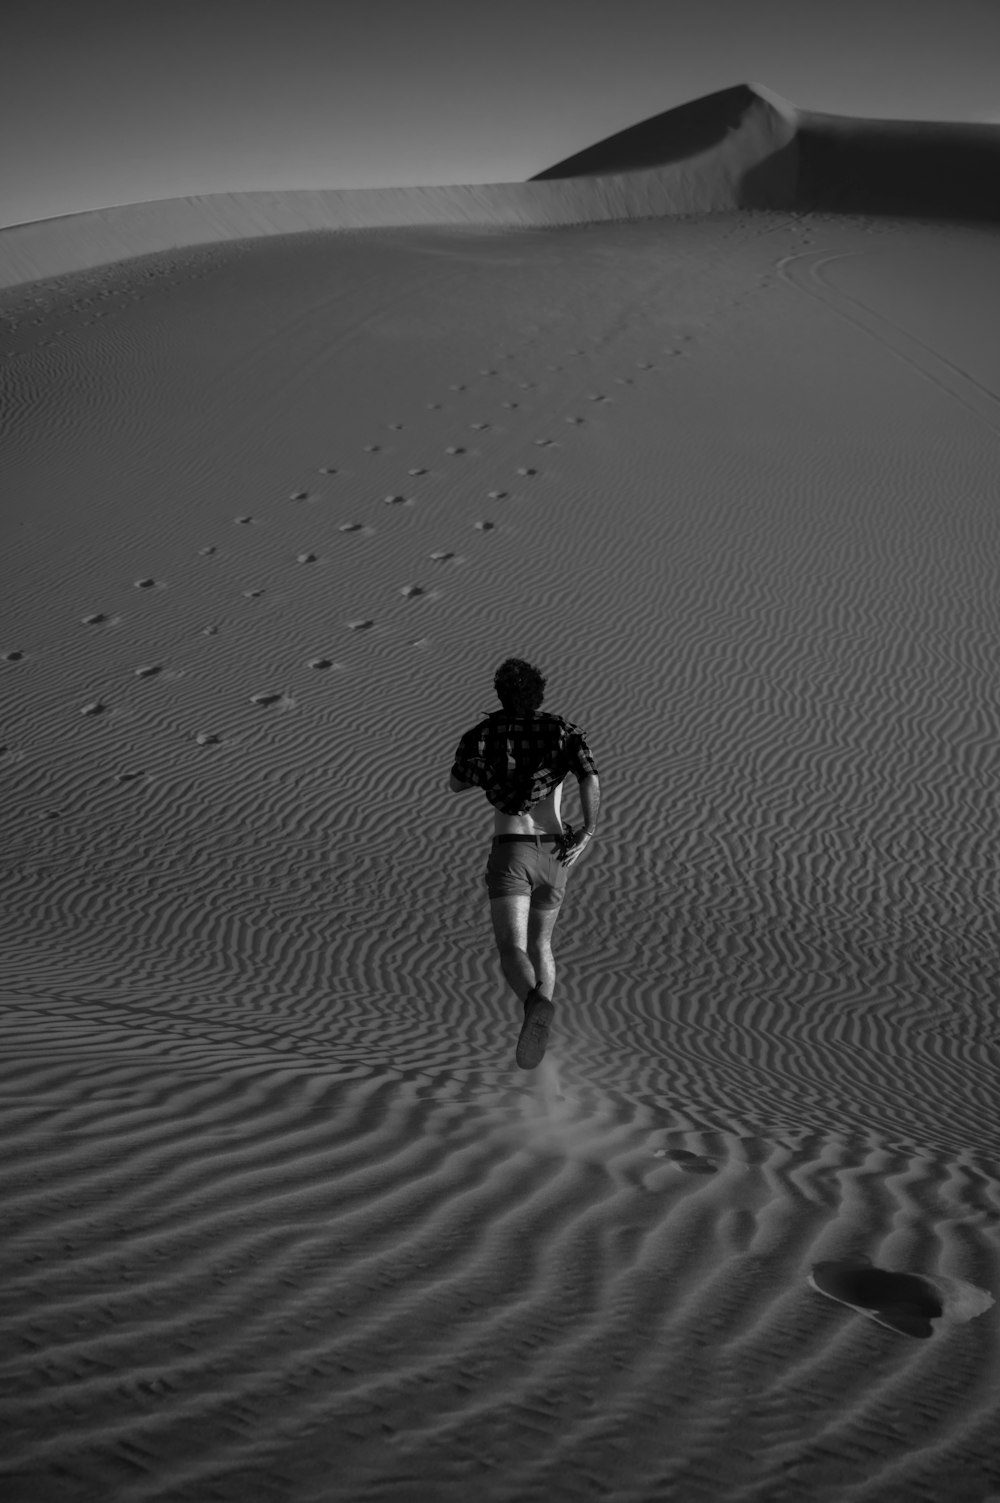 a man walking across a sandy field with footprints in the sand